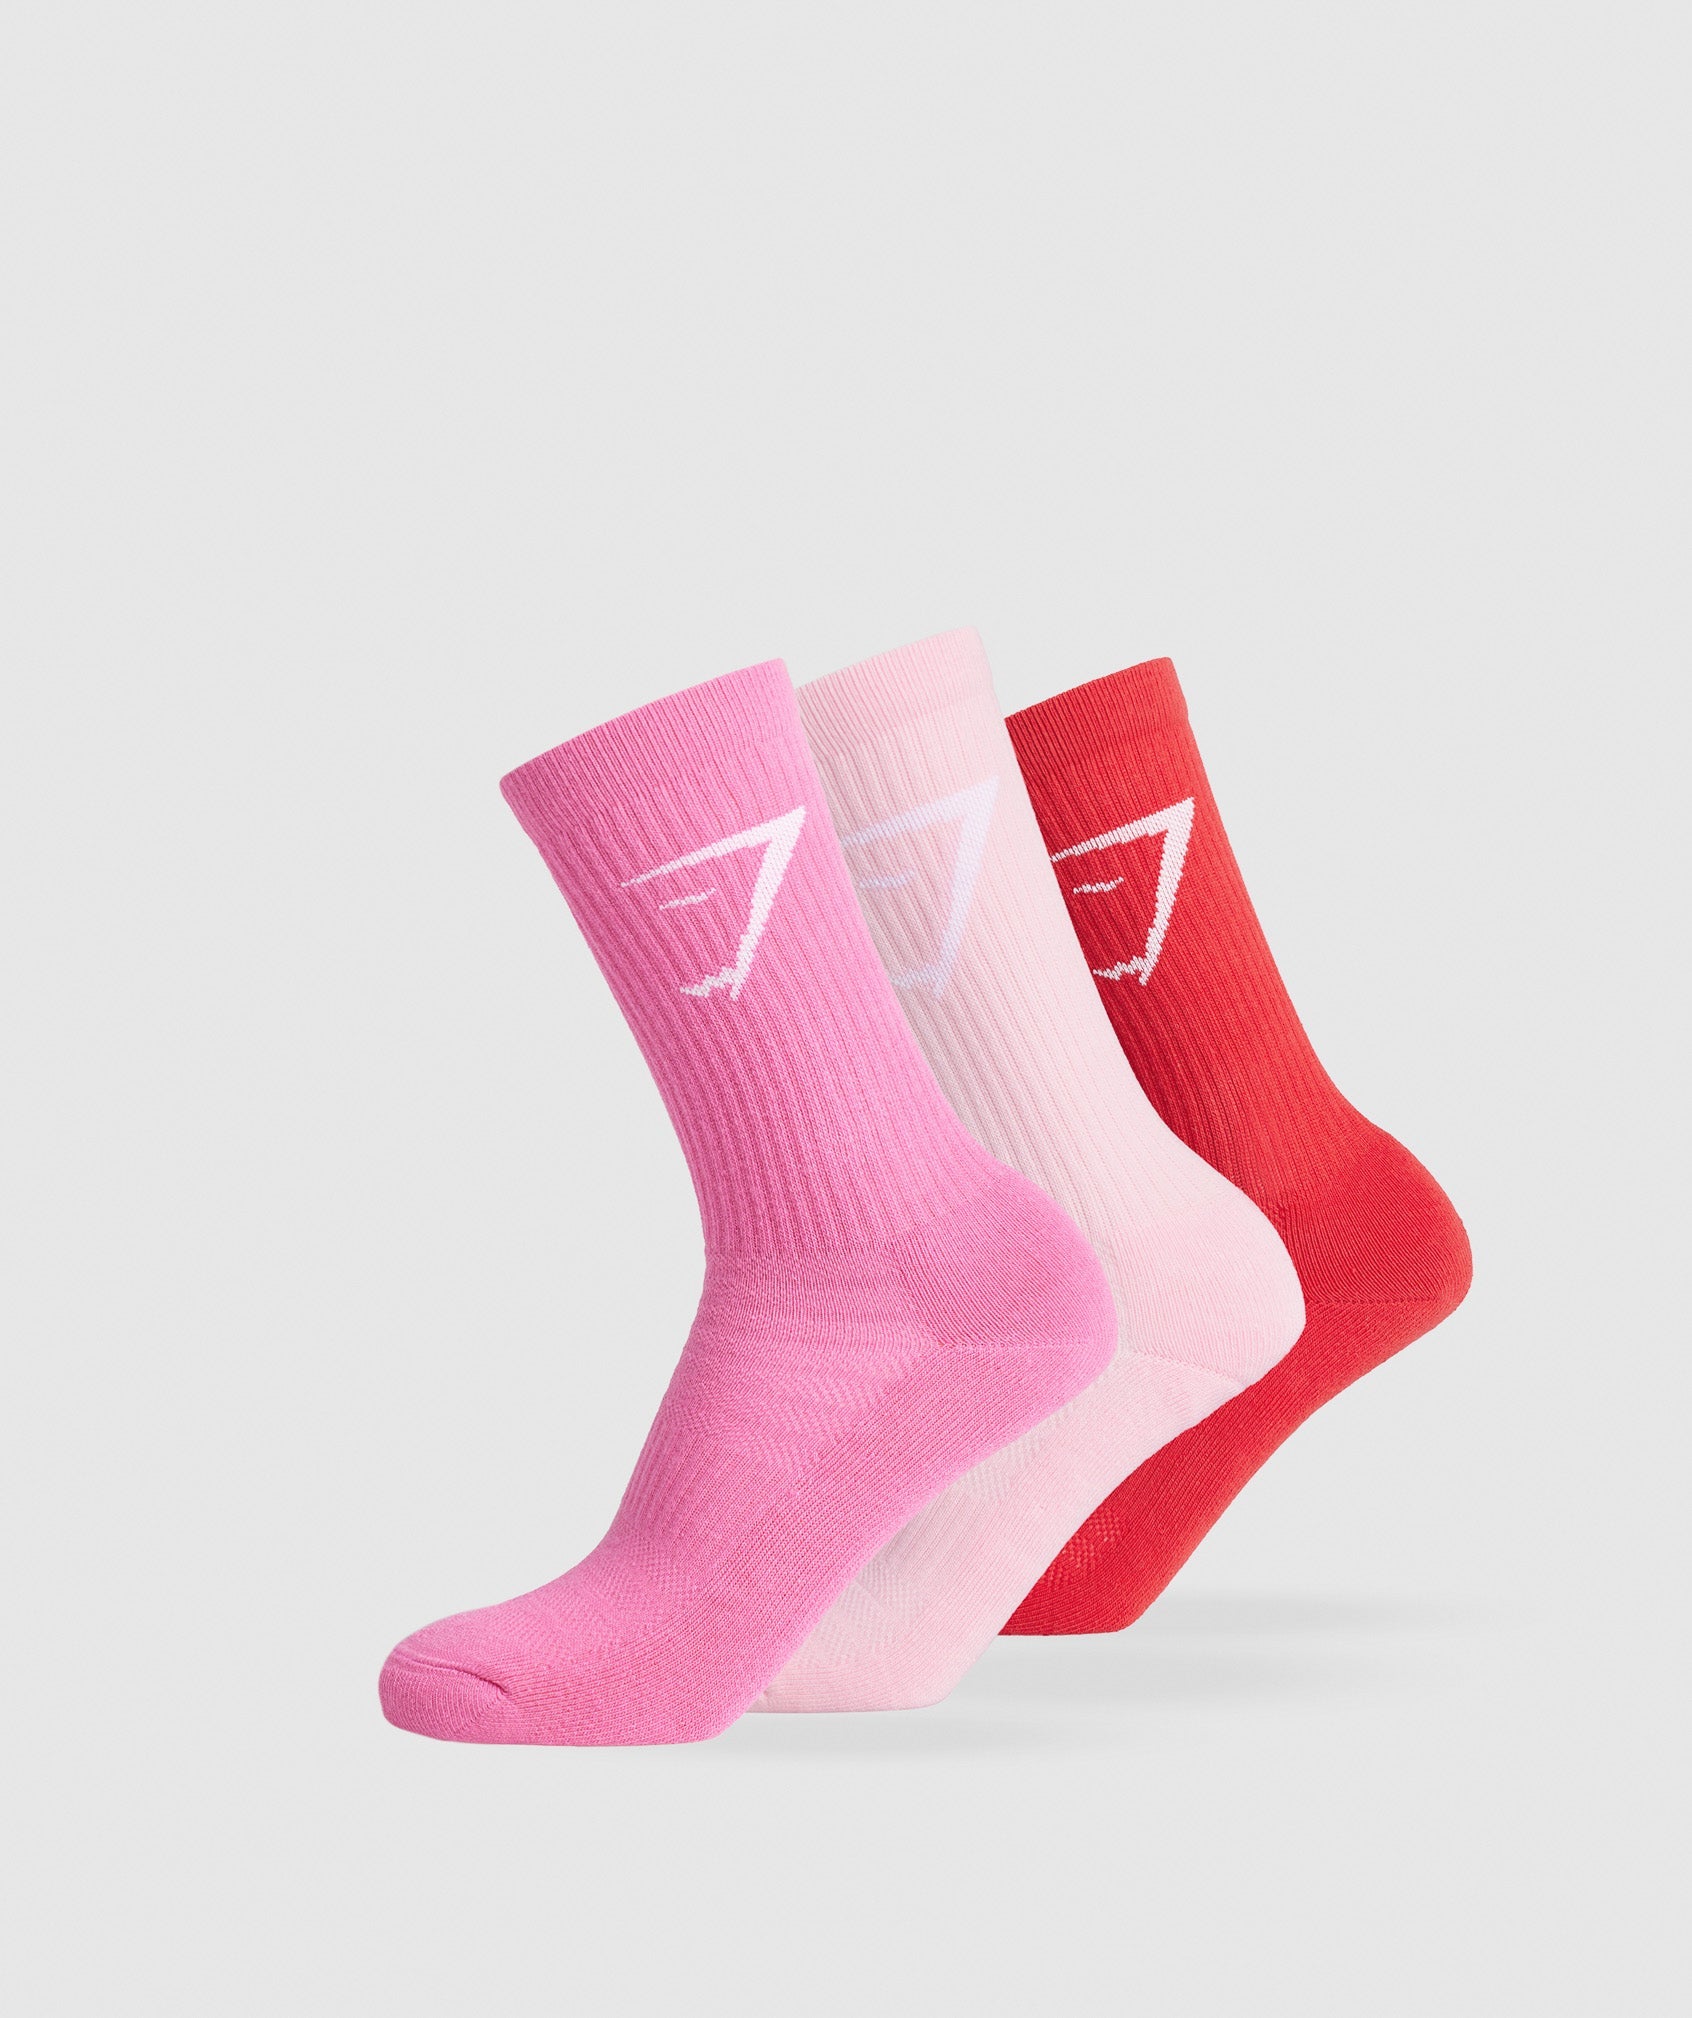 Crew Socks 3pk in Dolly Pink/Fetch Pink/Jamz Red is out of stock